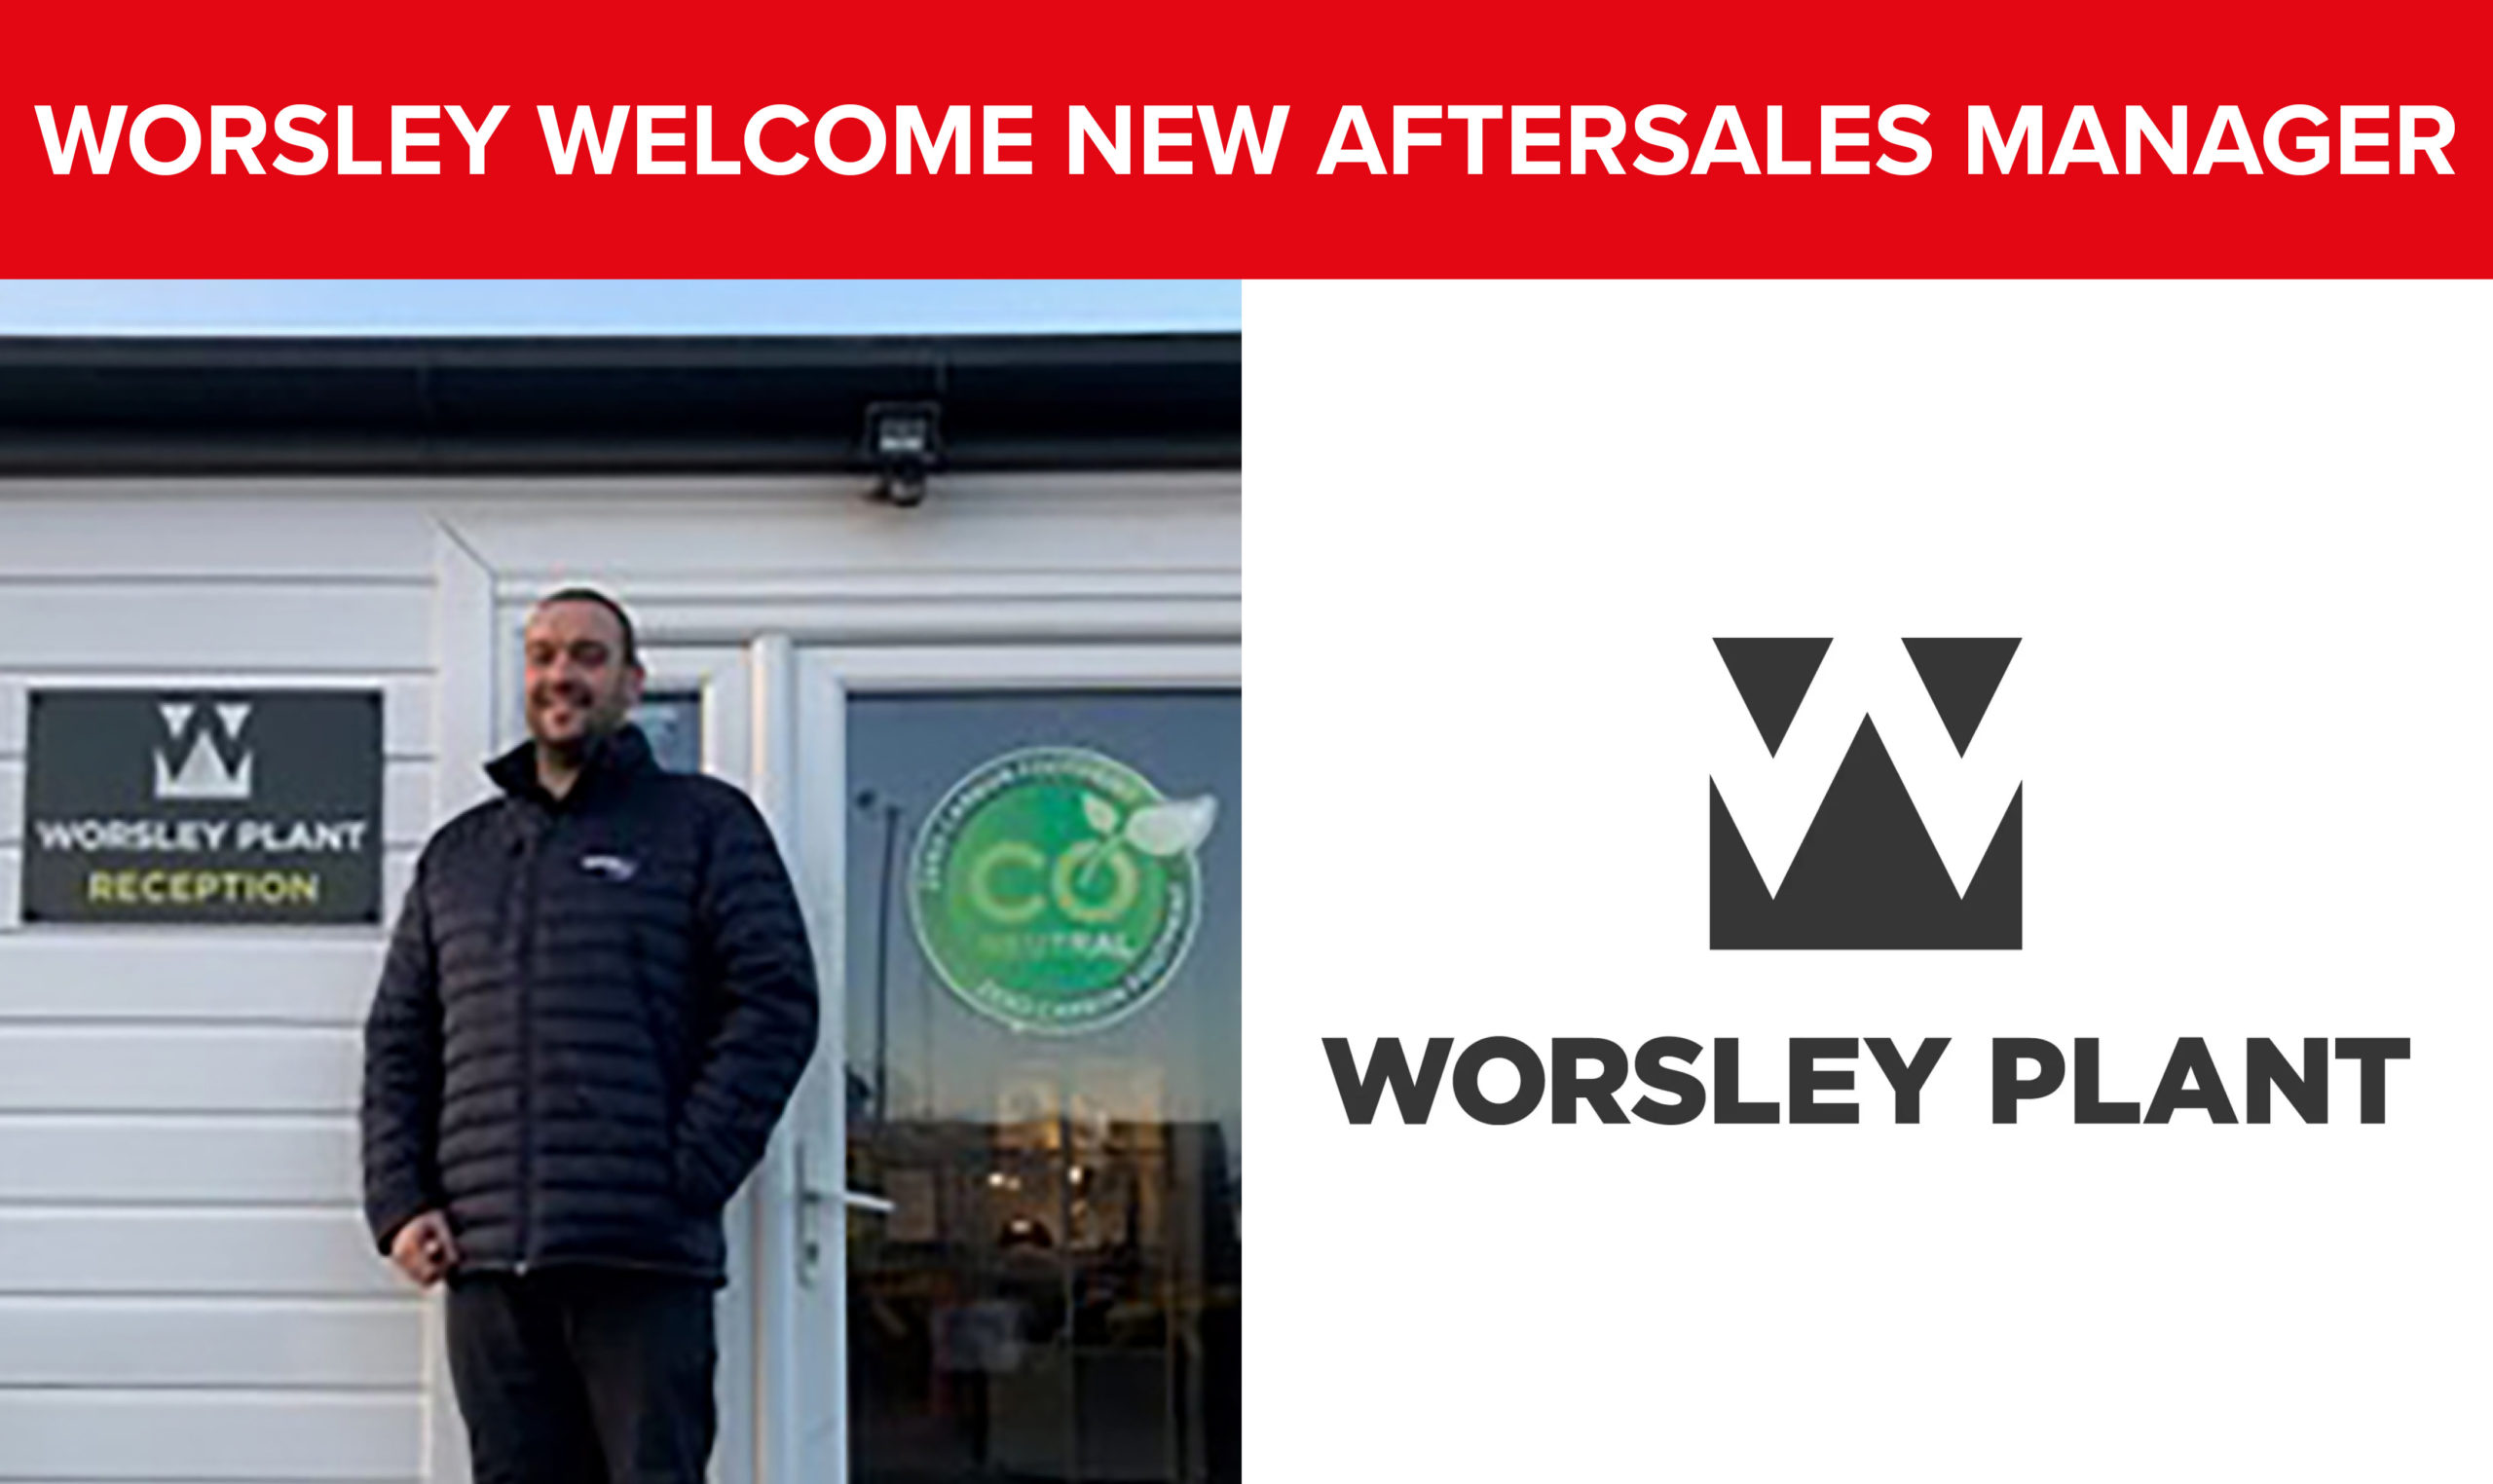 Worsley Plant welcome a new Aftersales Manager